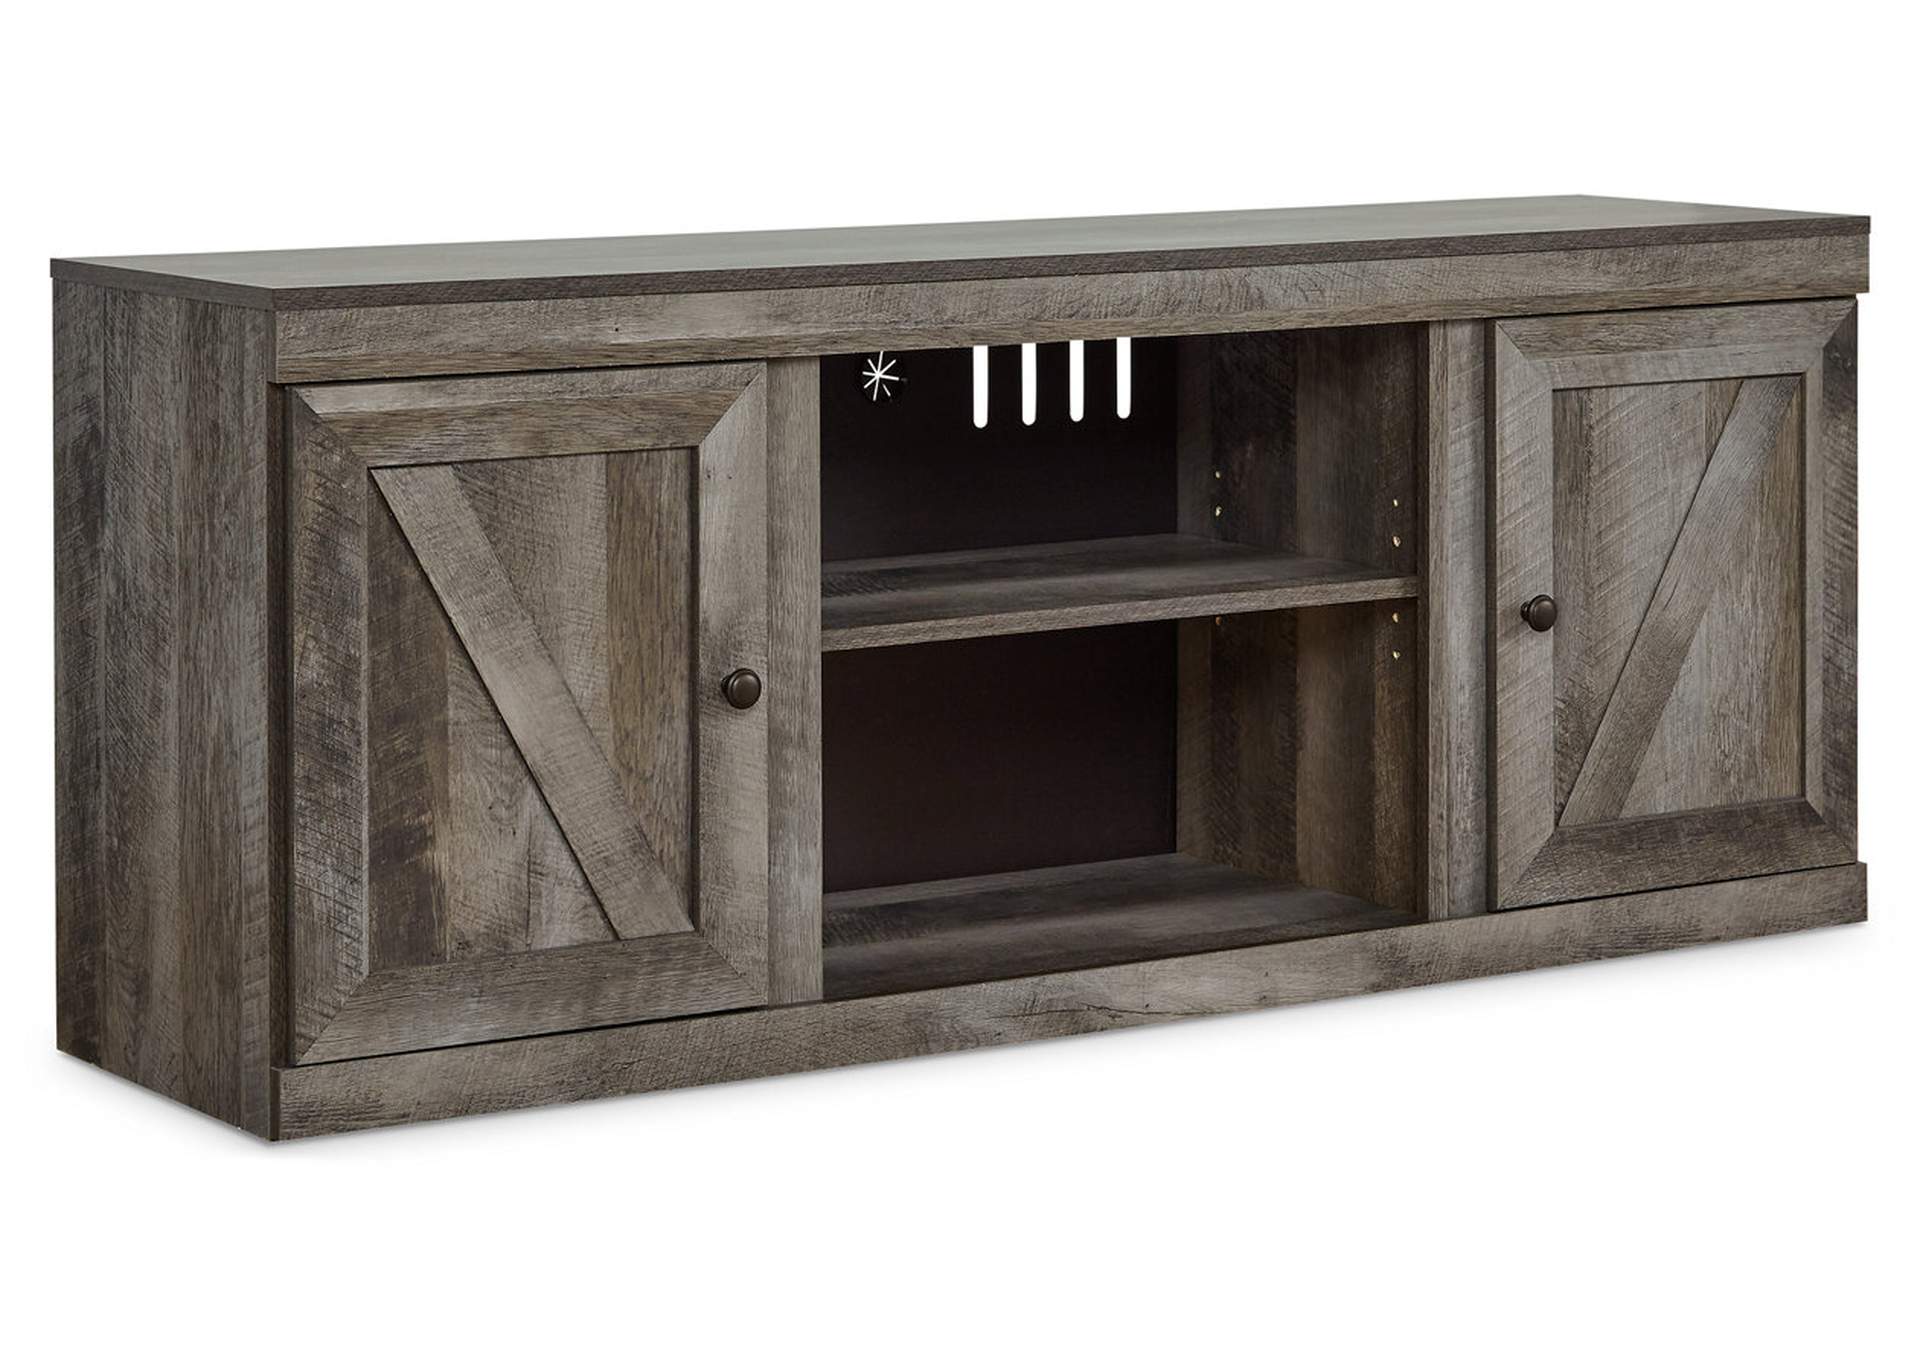 Wynnlow TV Stand with Electric Fireplace,Signature Design By Ashley